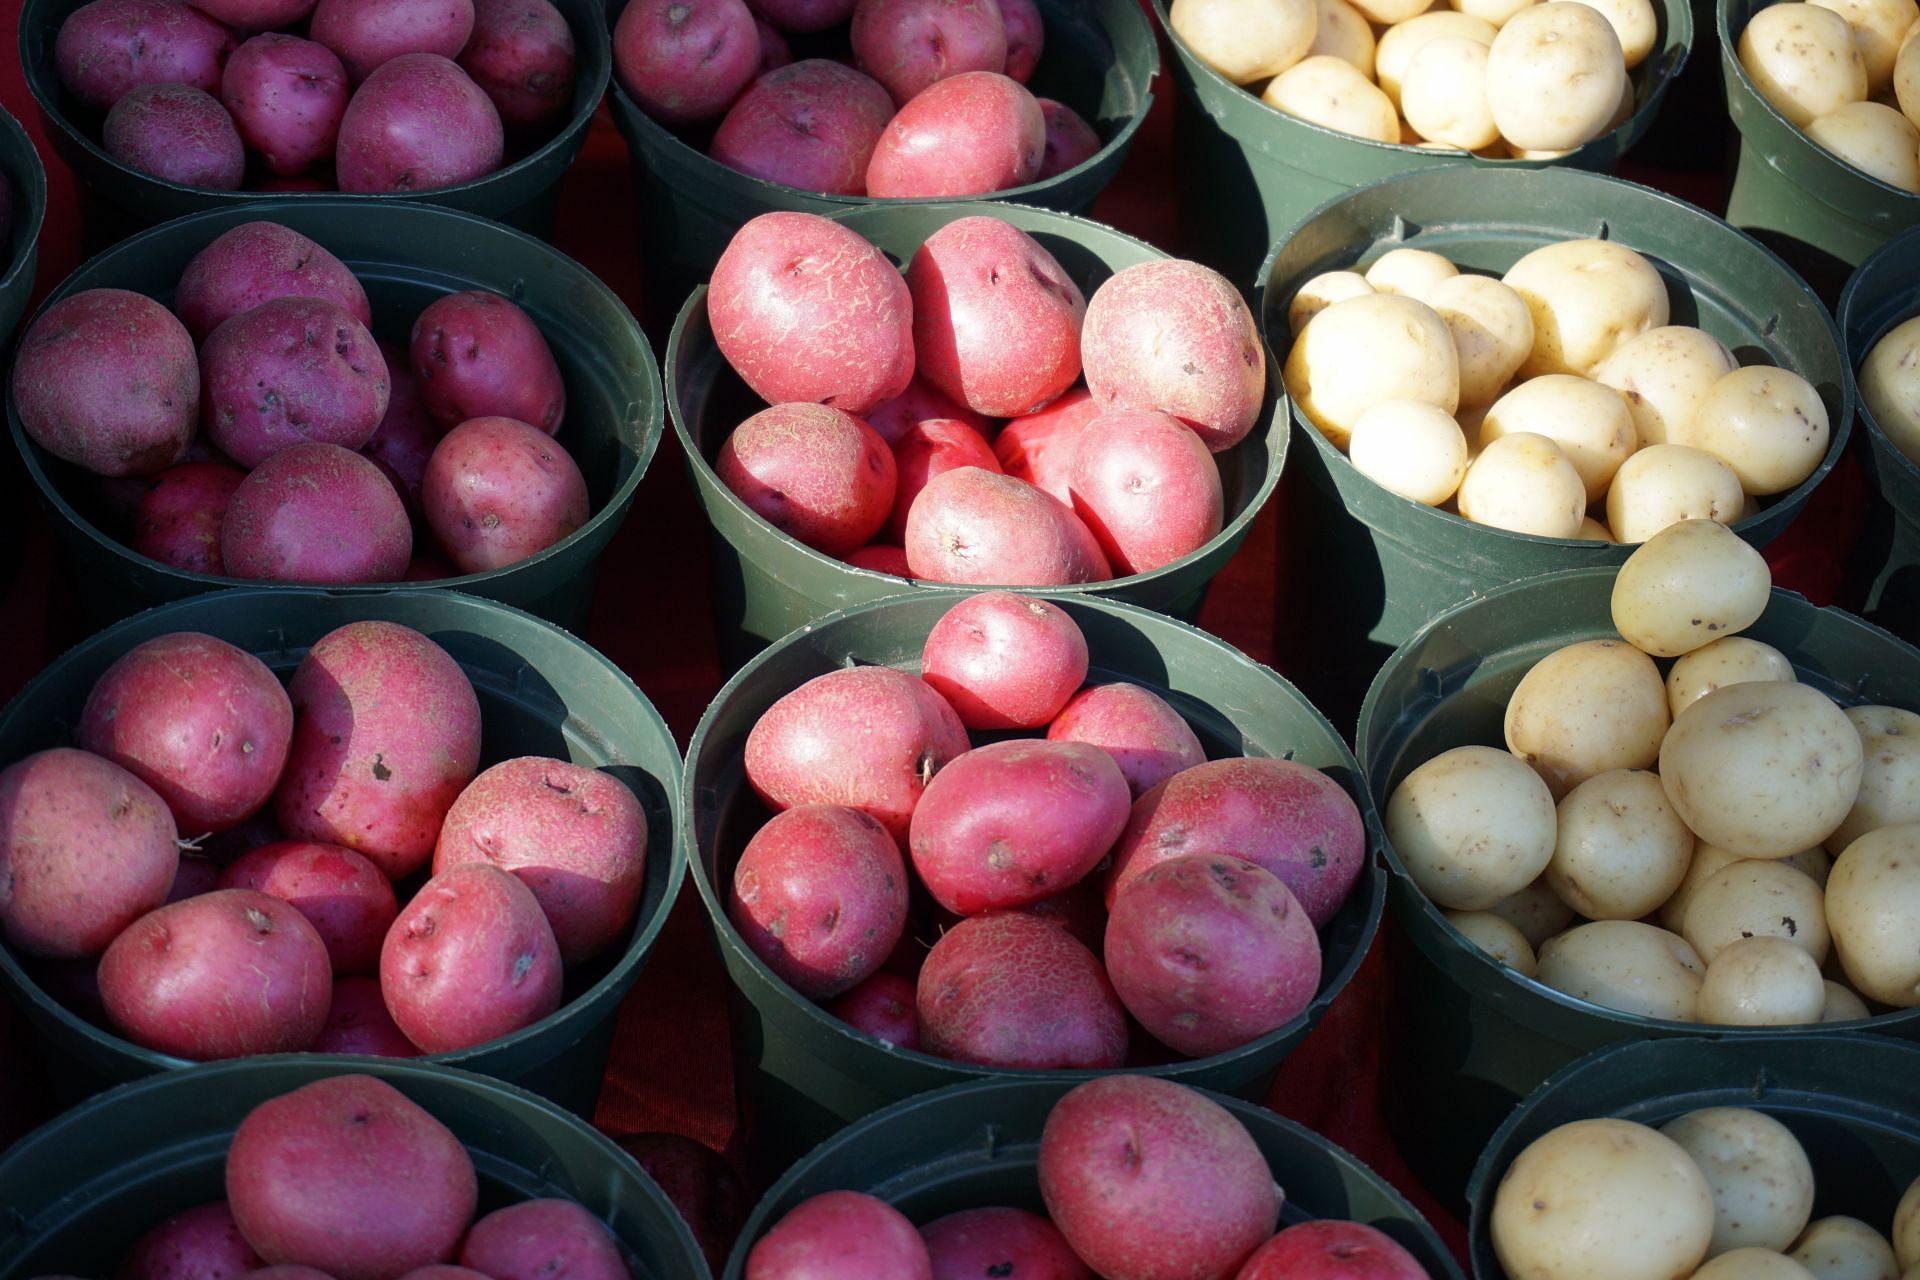 Potatoes are loaded with magnesiumand other nutrients. (Image via Pexels / Lawrence Aaron)